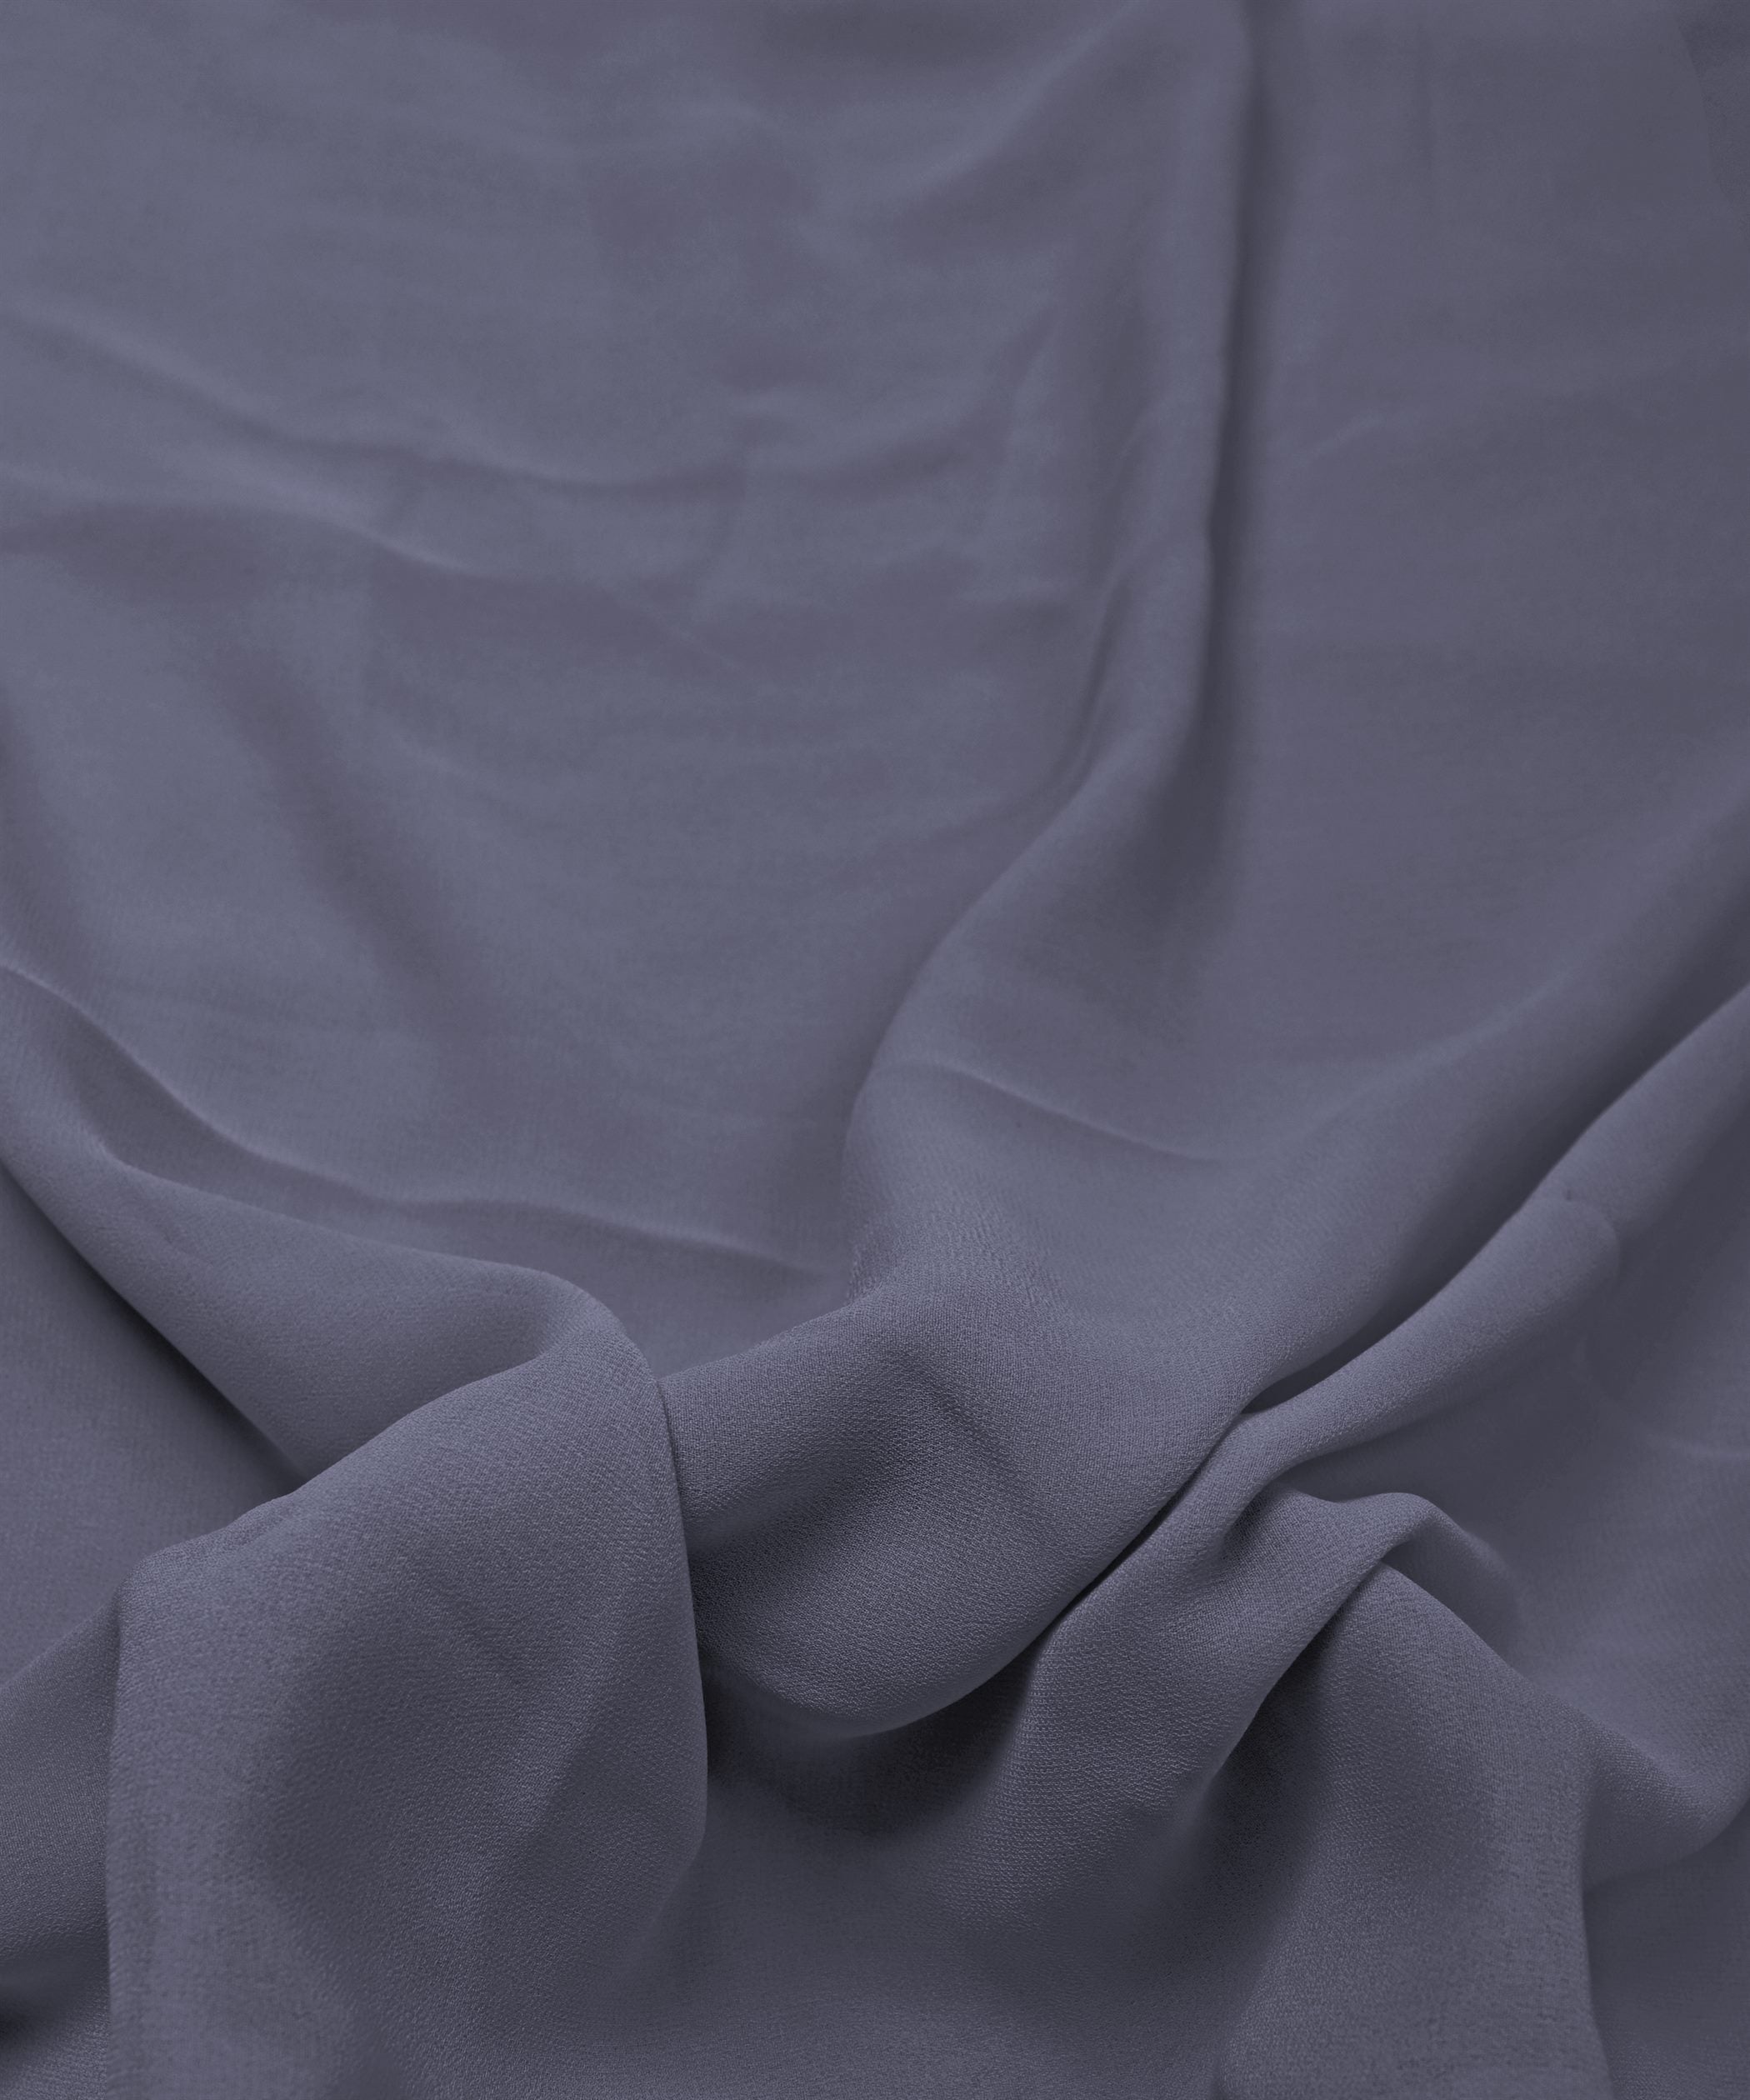 Grey Plain Dyed Georgette (60 Grams) Fabric